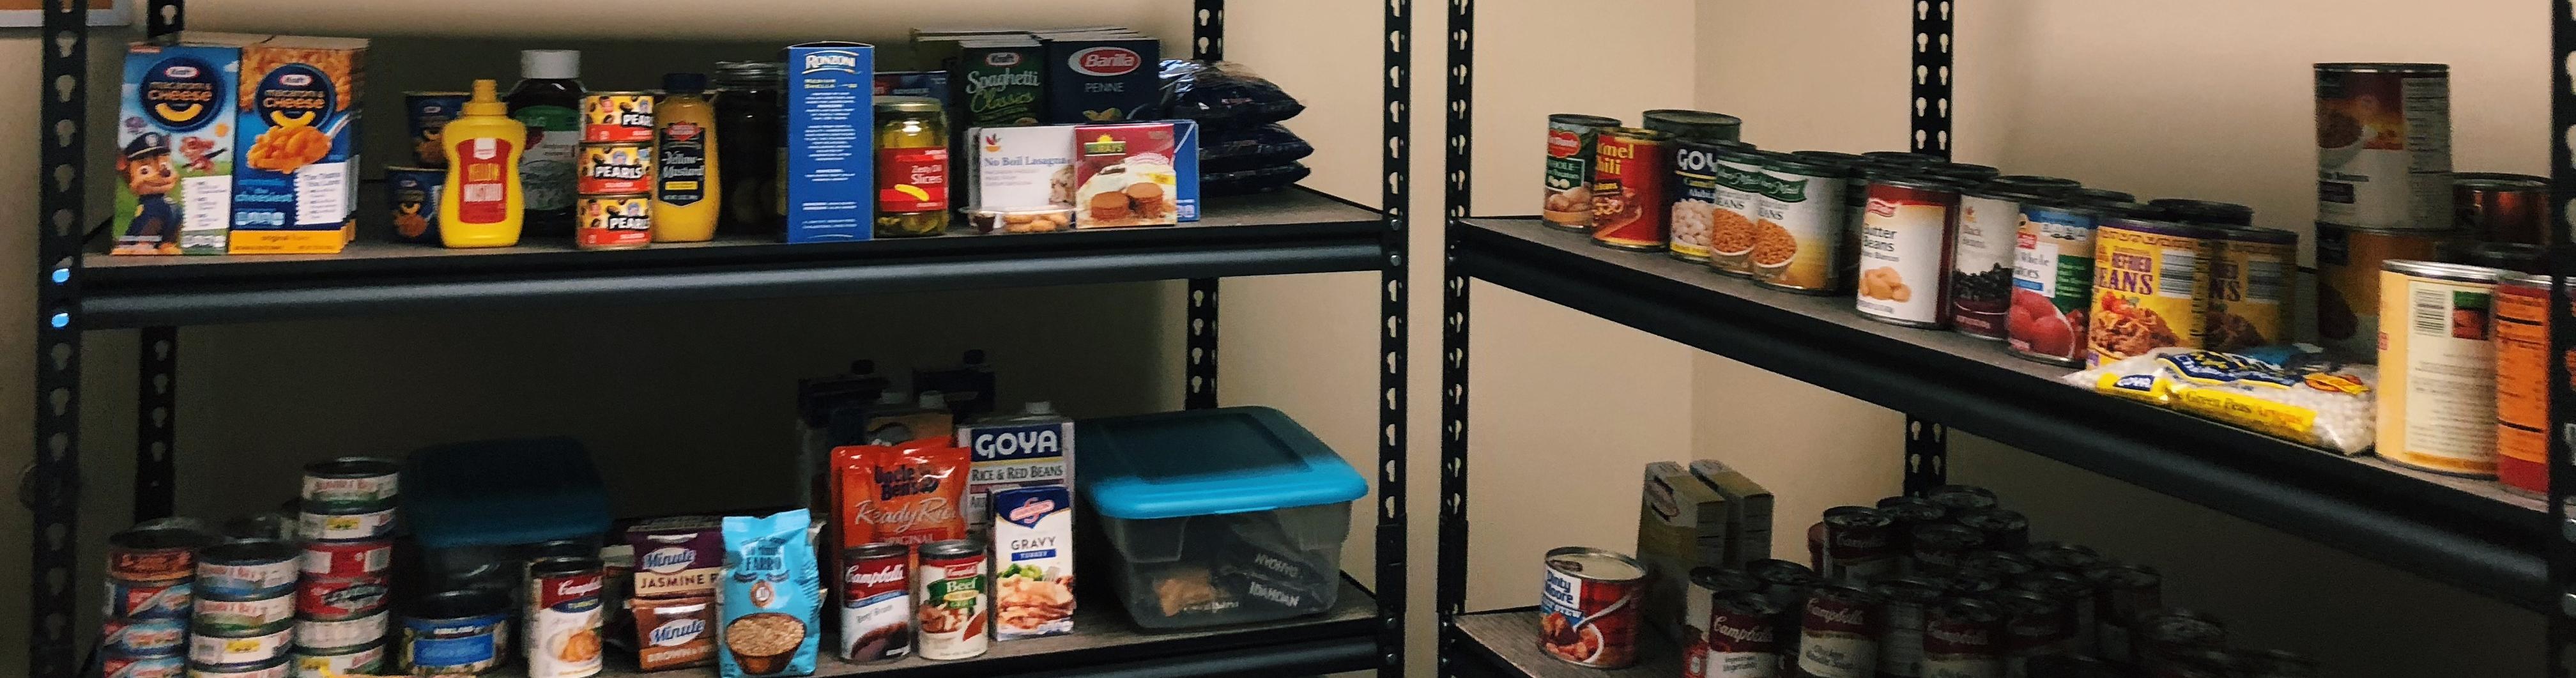 Food pantry shelves filled with supplies.